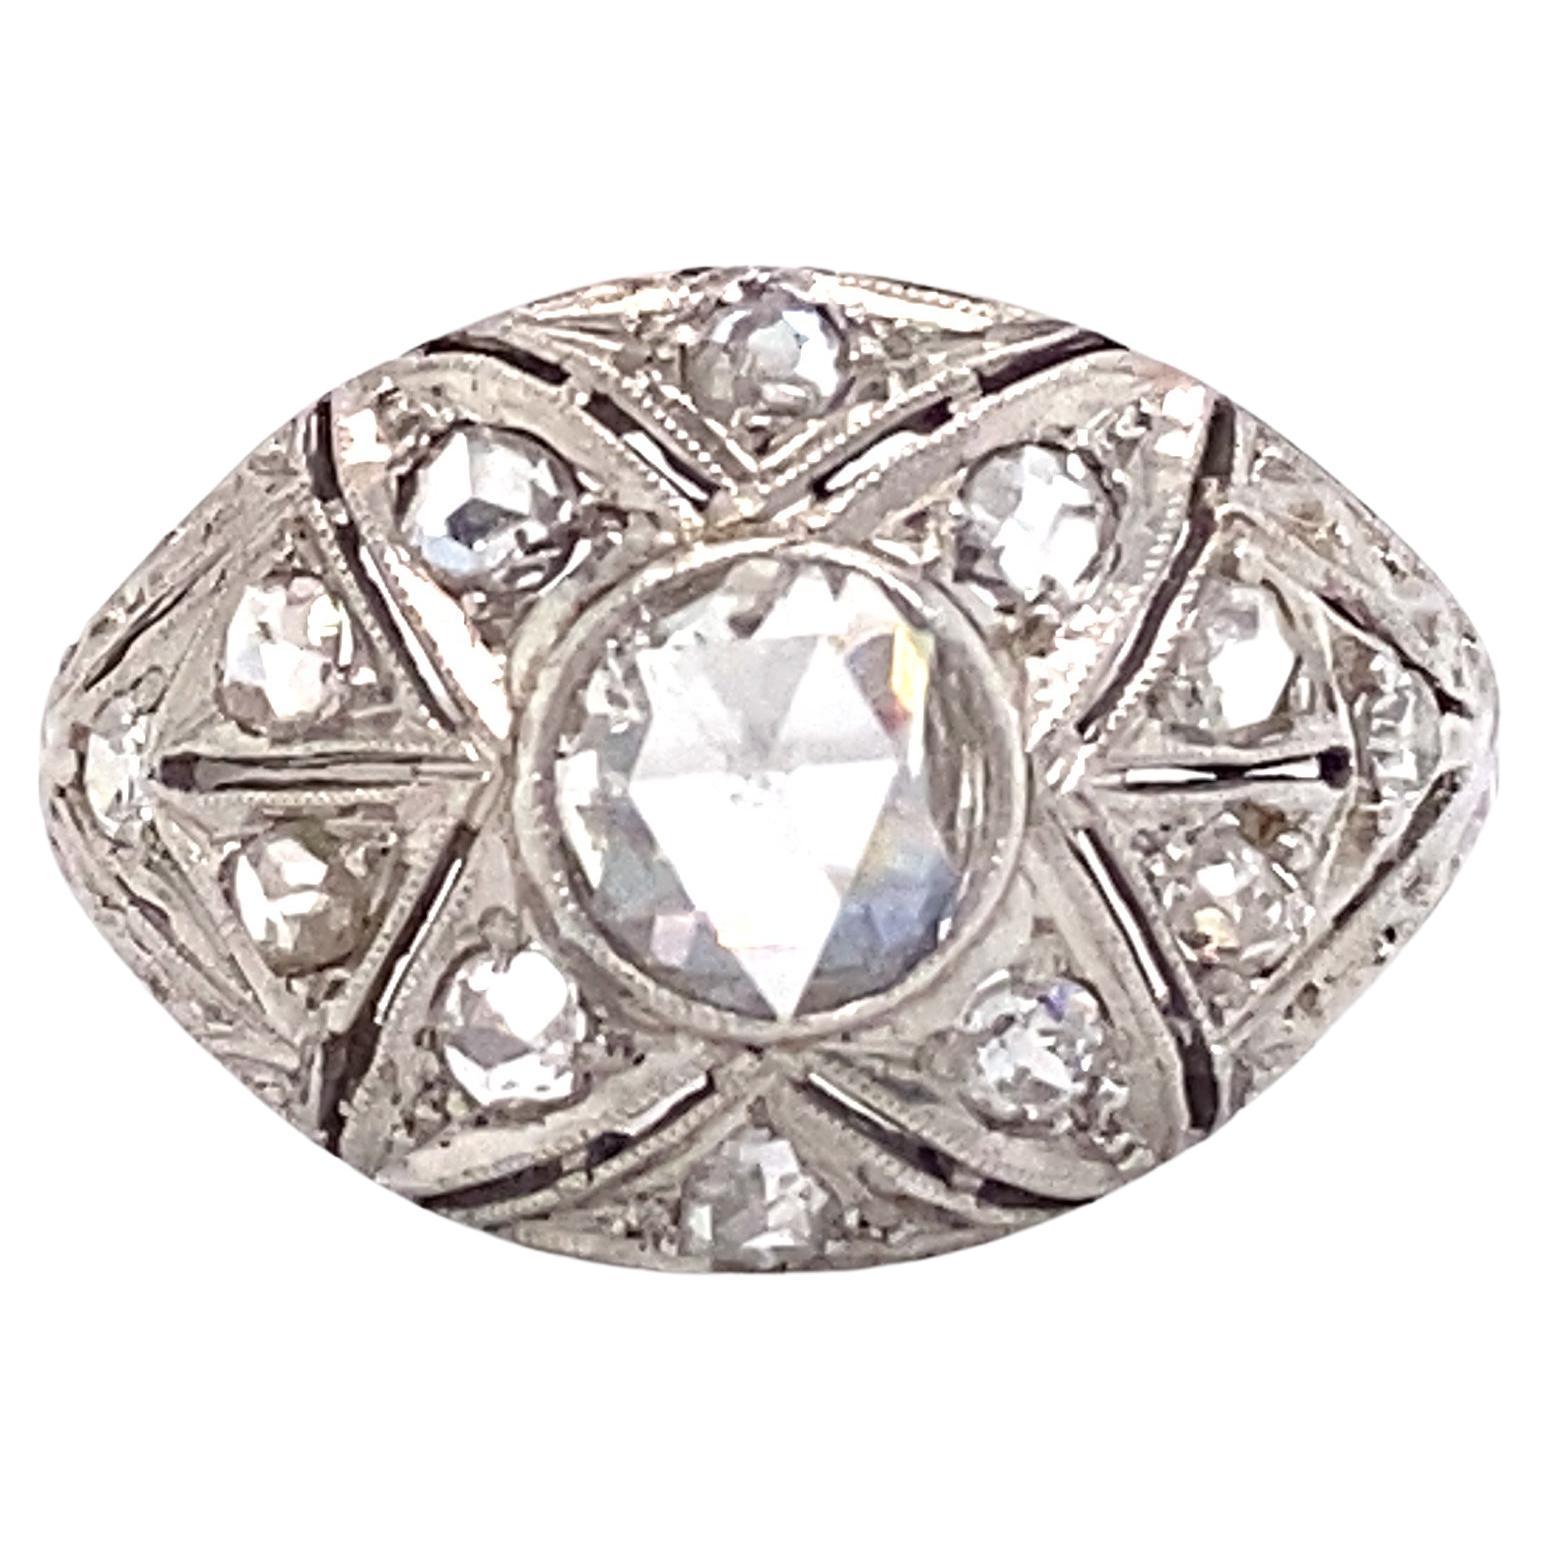 Circa 1890s Victorian Rose Cut Diamond Ring in Platinum and 14K White Gold For Sale